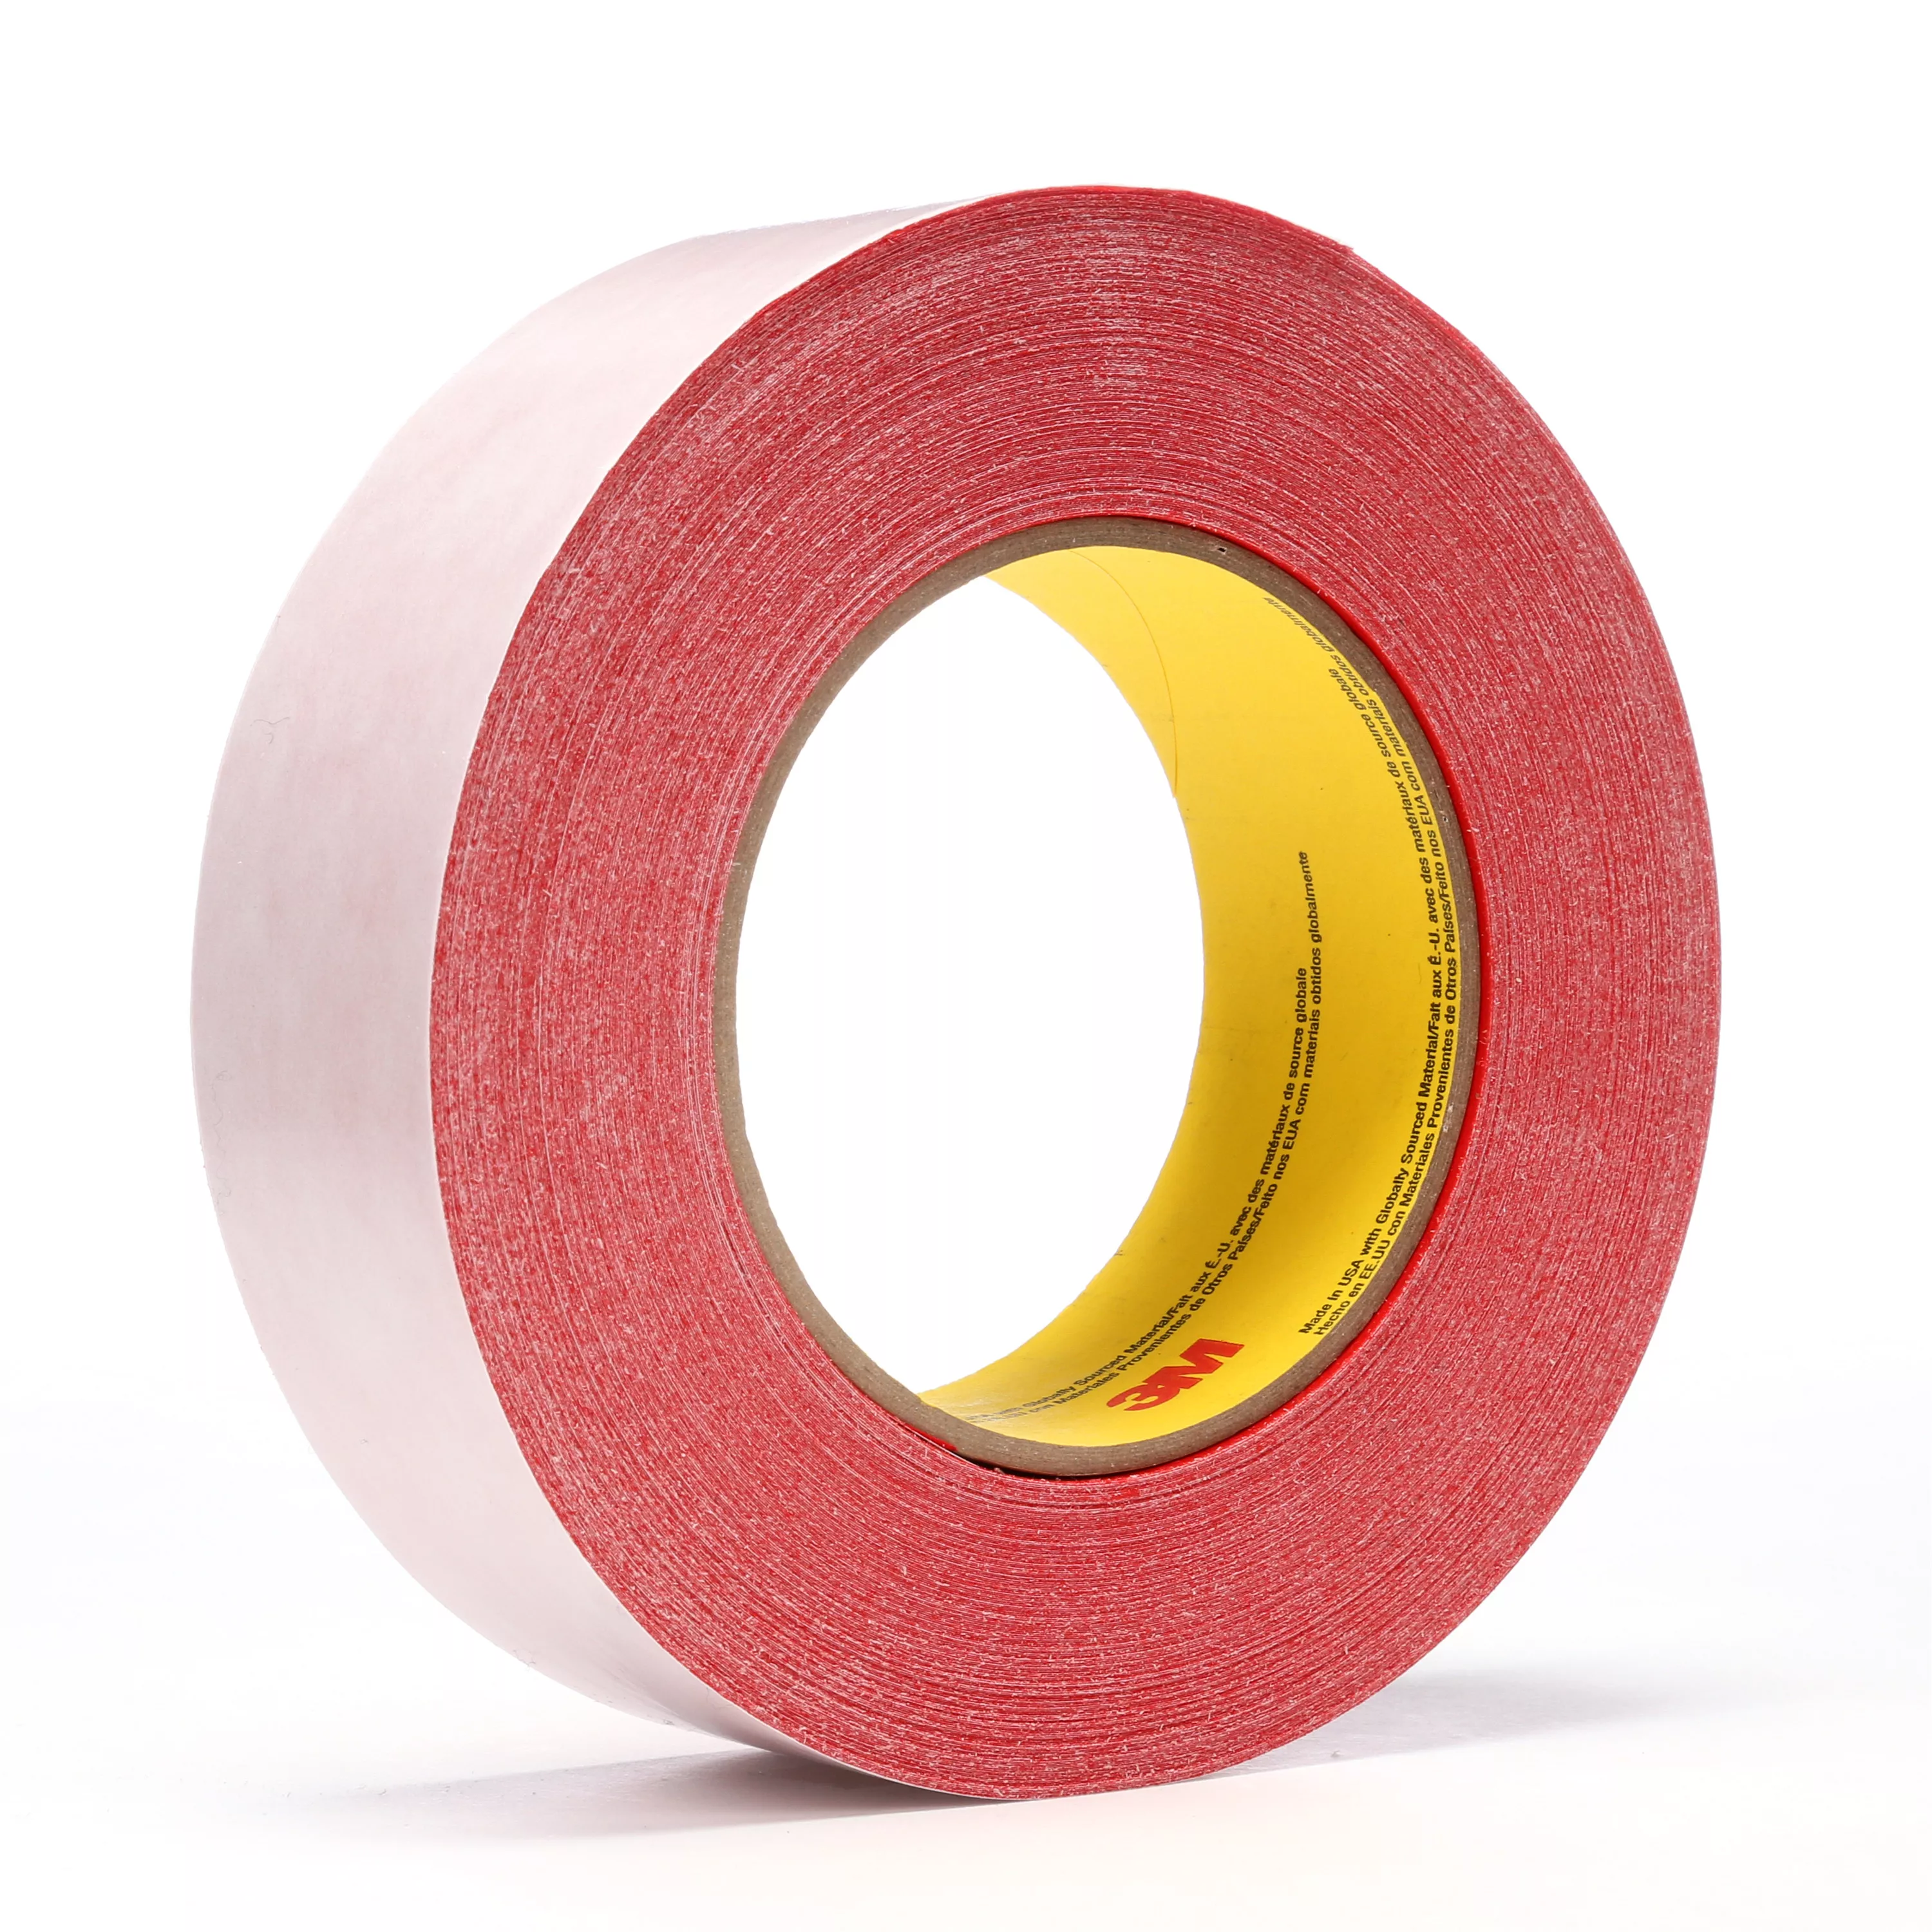 3M™ Double Coated Tape 9737R, Red, 36 mm x 55 m, 3.5 mil, 32 Roll/Case